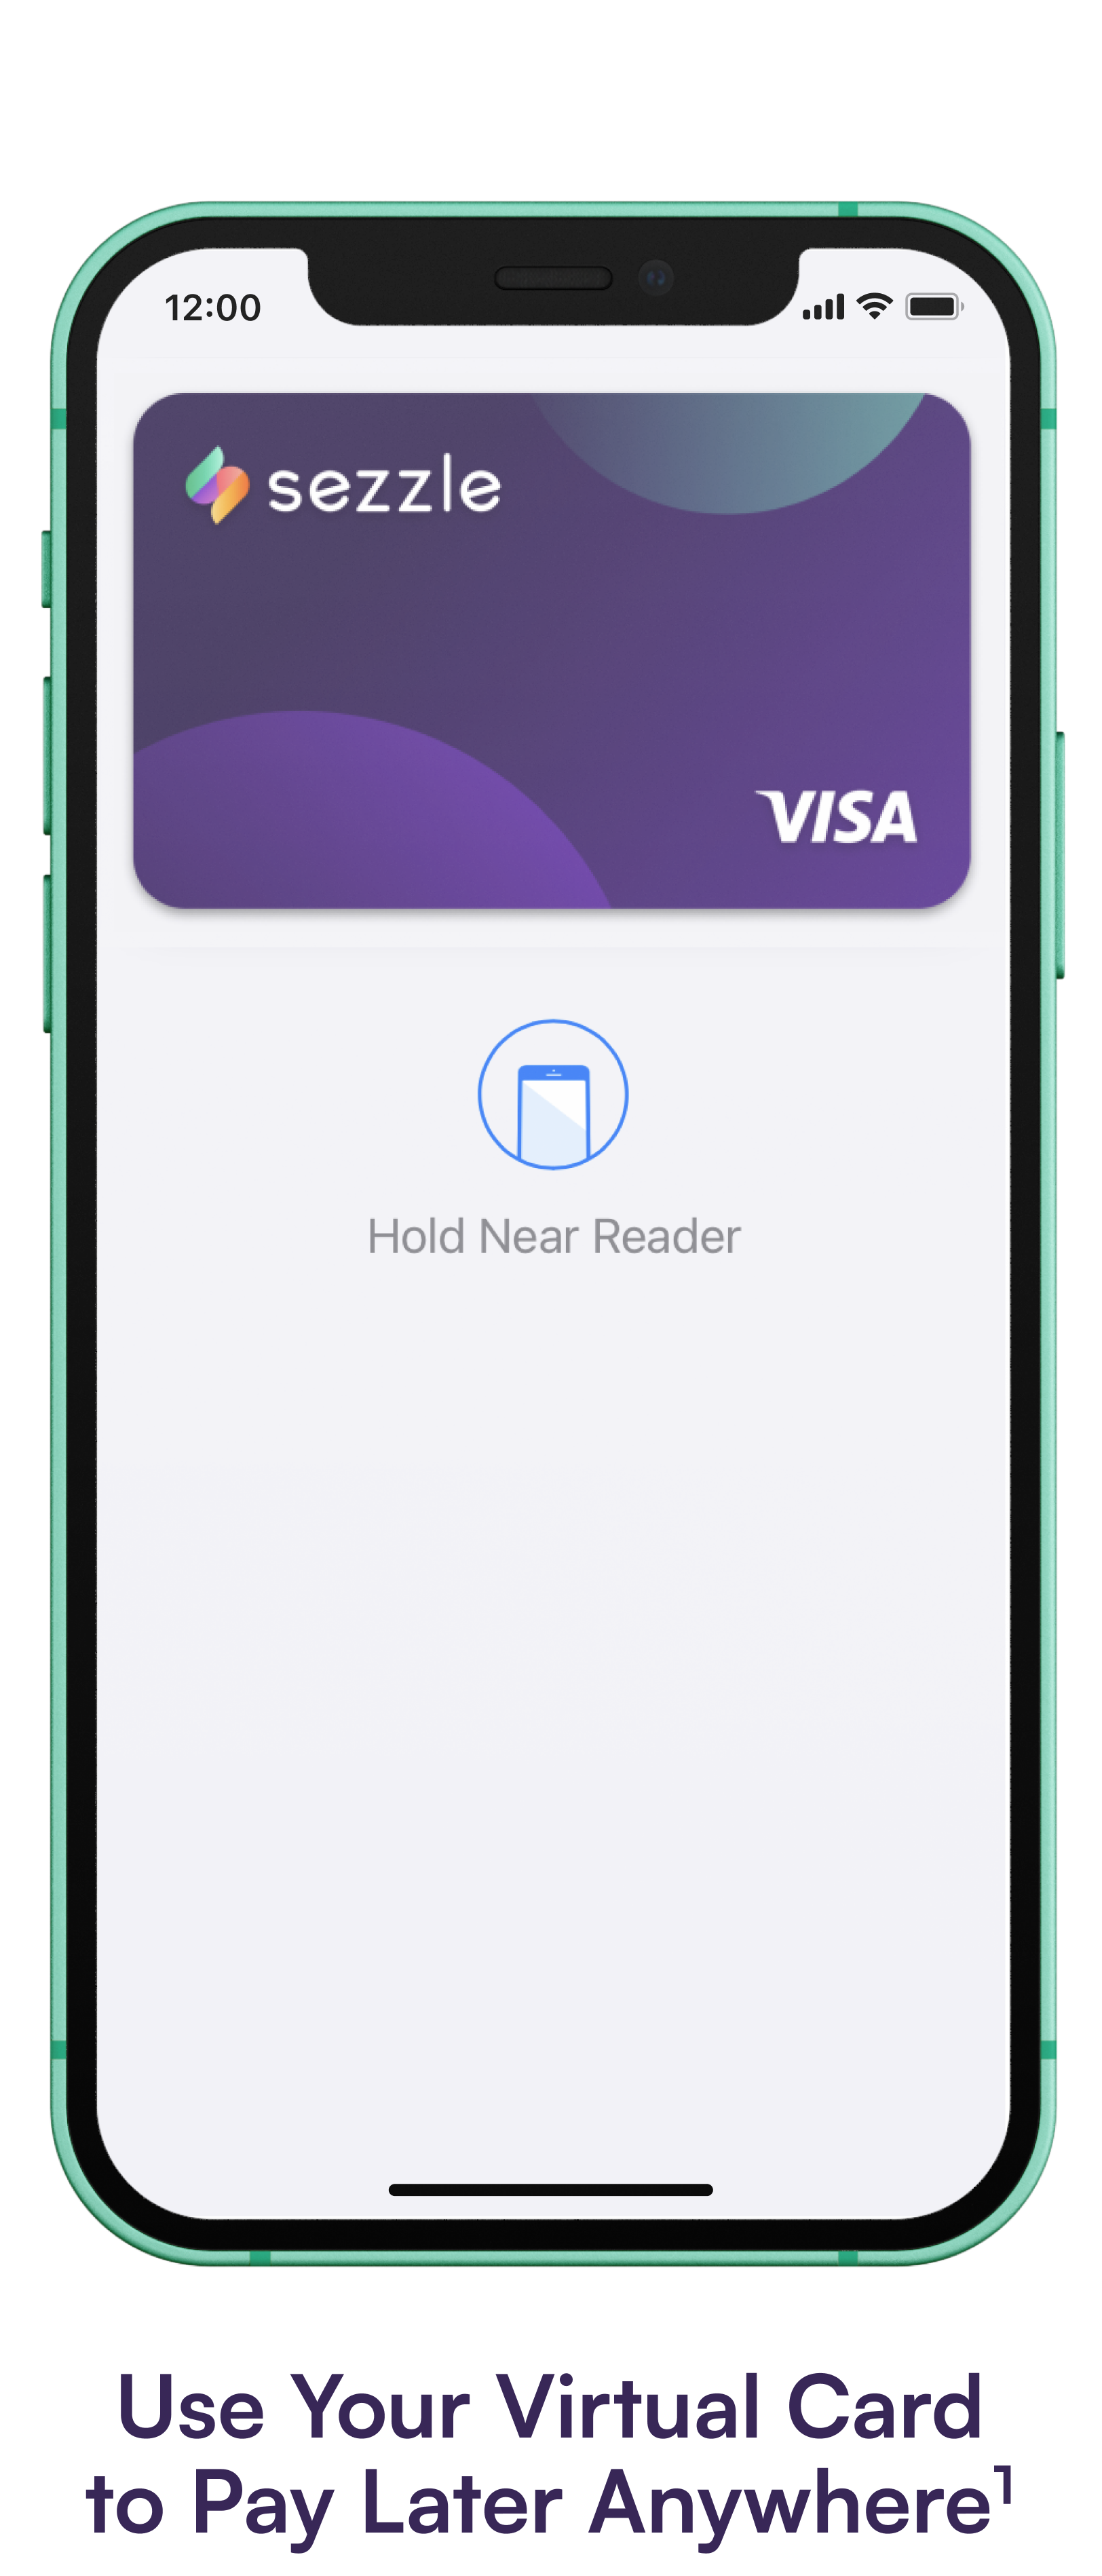 What is the Sezzle Virtual Card and how do I sign up? – Sezzle